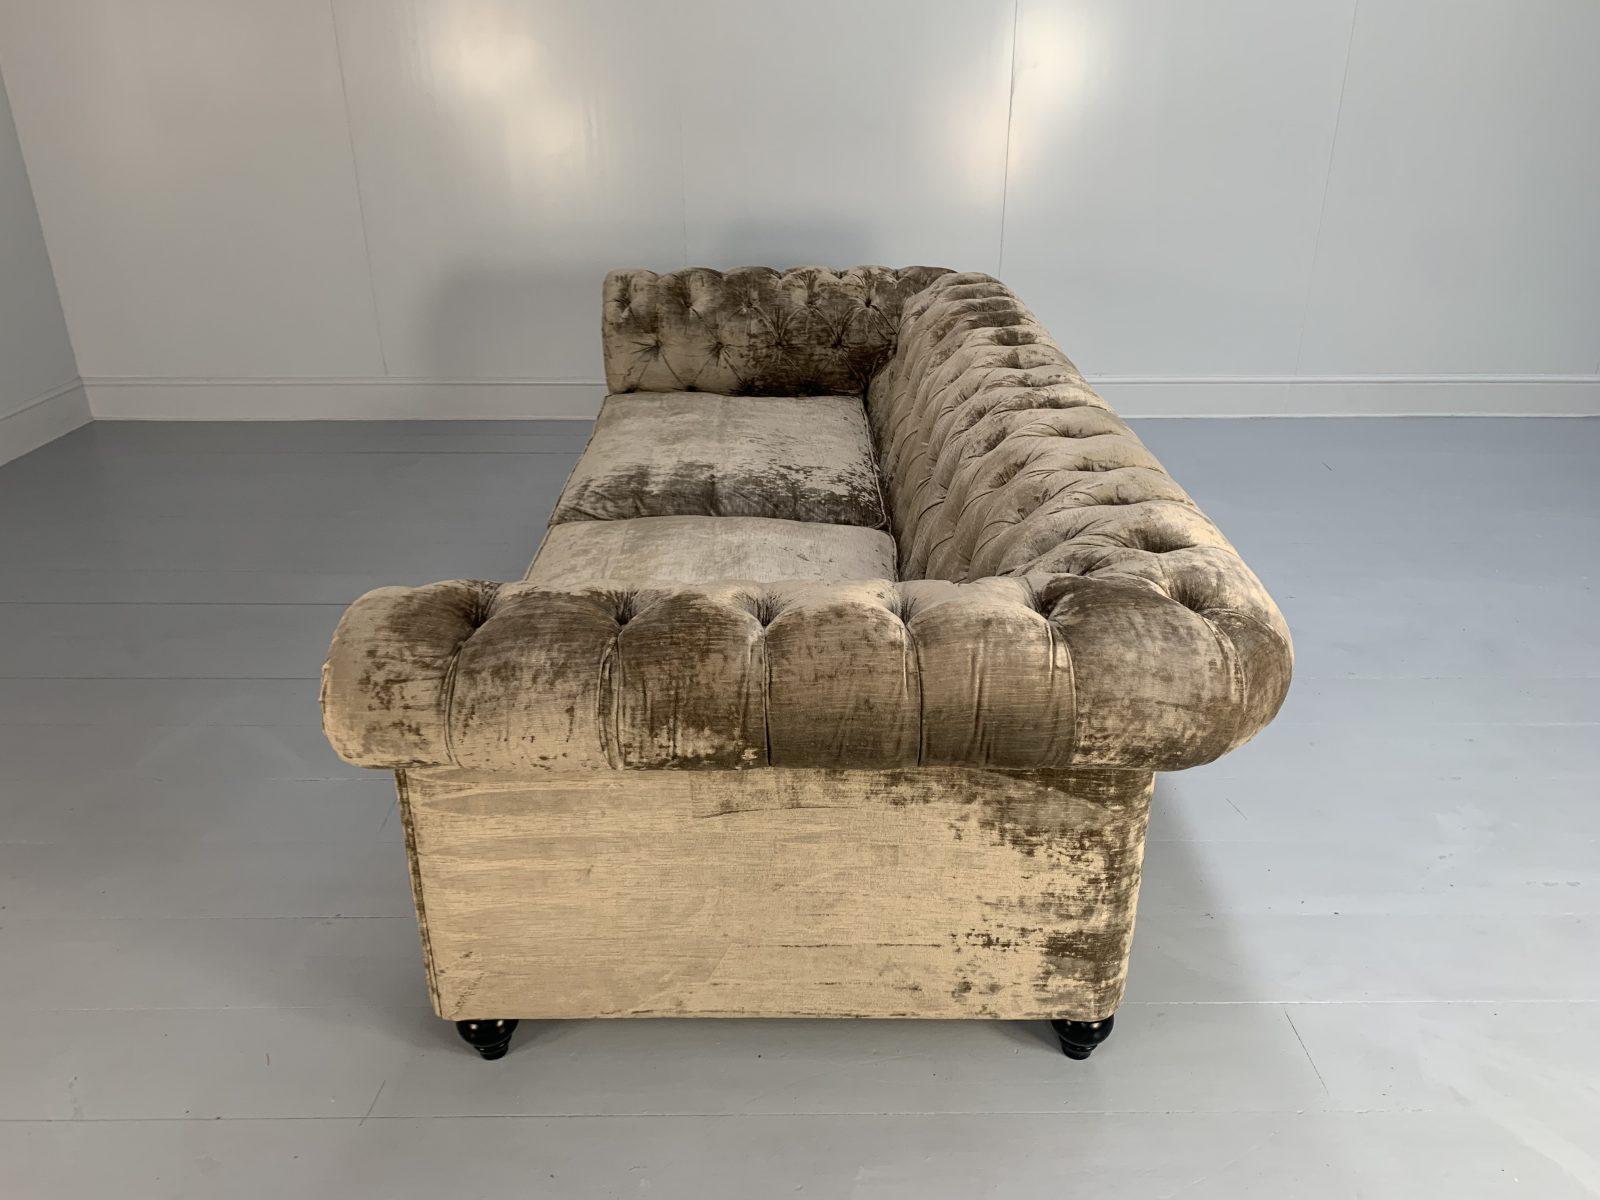 Duresta “Connaught” Grand Chesterfield Sofa – In Pale Gold Mink Brown “Rembrandt 6